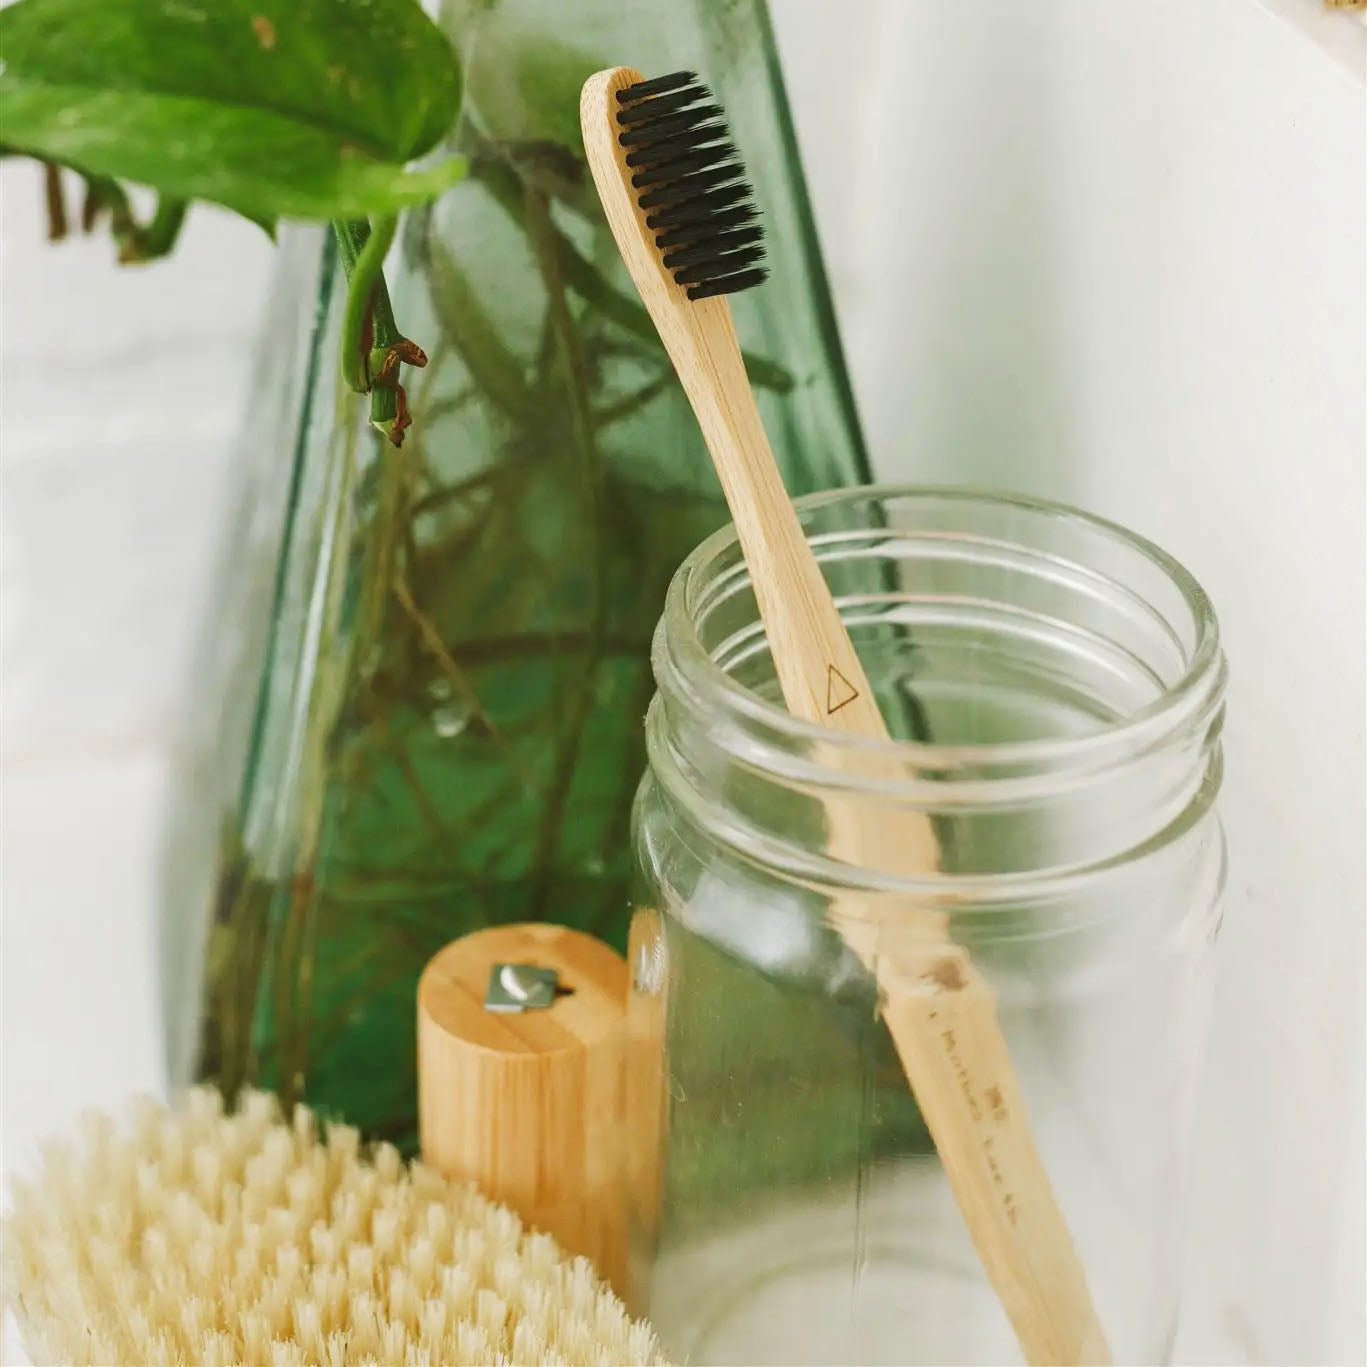 bamboo tooth brushes with active carbon bristles extra soft.  geometric shapes to tell them apart.  single brush in glass jar